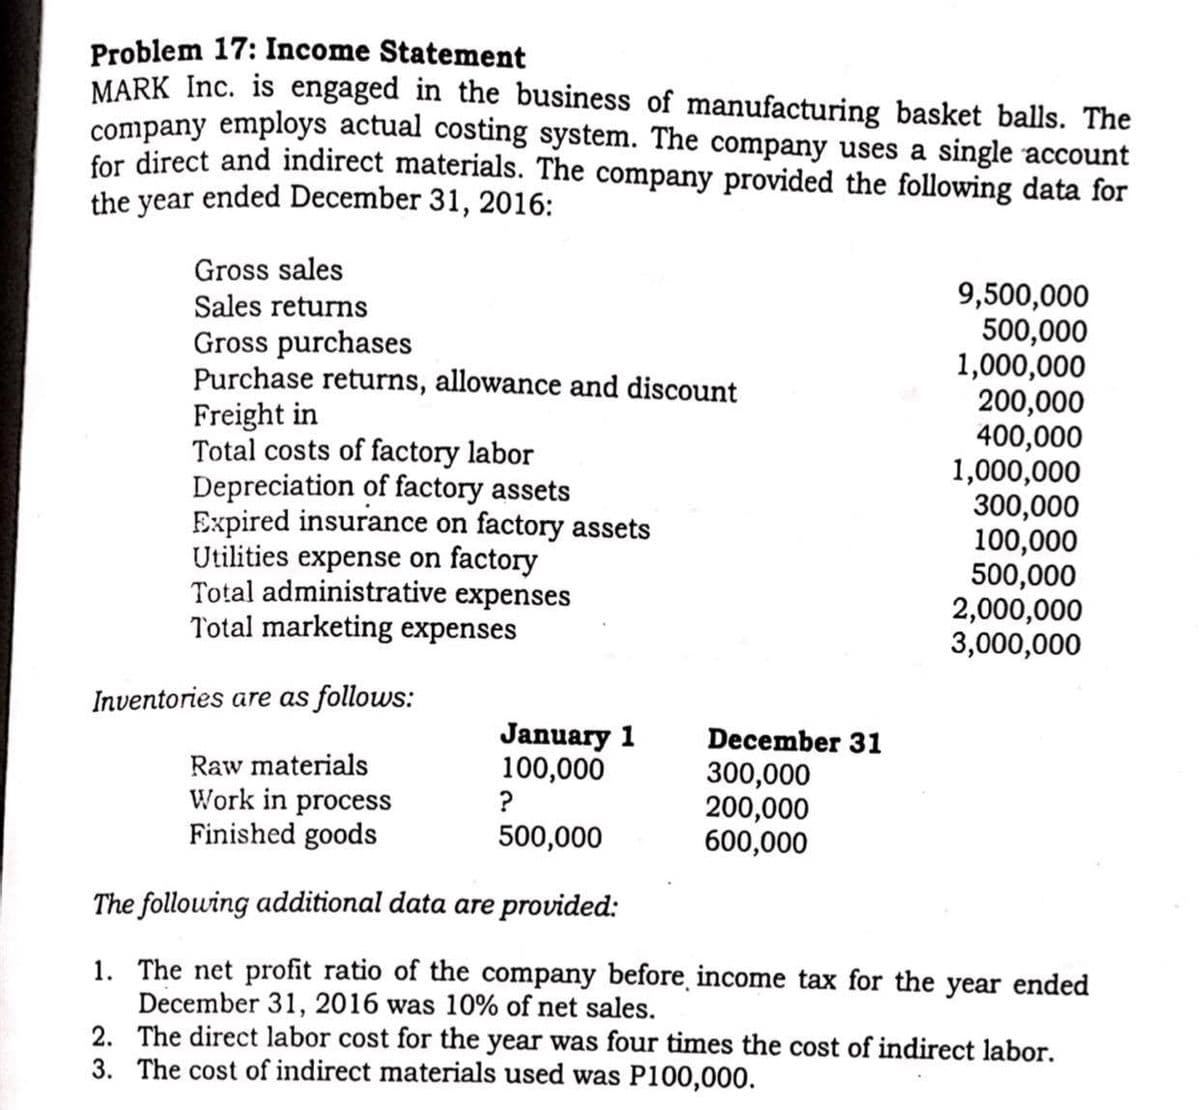 Problem 17: Income Statement
MARK Inc. is engaged in the business of manufacturing basket balls. The
company employs actual costing system. The company uses a single account
for direct and indirect materials. The company provided the following data for
the year ended December 31, 2016:
Gross sales
Sales returns
Gross purchases
Purchase returns, allowance and discount
Freight in
Total costs of factory labor
Depreciation of factory assets
Expired insurance on factory assets
Utilities expense on factory
Total administrative expenses
Total marketing expenses
9,500,000
500,000
1,000,000
200,000
400,000
1,000,000
300,000
100,000
500,000
2,000,000
3,000,000
Inventories are as follows:
January 1
100,000
?
December 31
Raw materials
Work in process
Finished goods
300,000
200,000
600,000
500,000
The following additional data are provided:
1. The net profit ratio of the company before income tax for the year ended
December 31, 2016 was 10% of net sales.
2. The direct labor cost for the year was four times the cost of indirect labor.
3. The cost of indirect materials used was P100,000.
